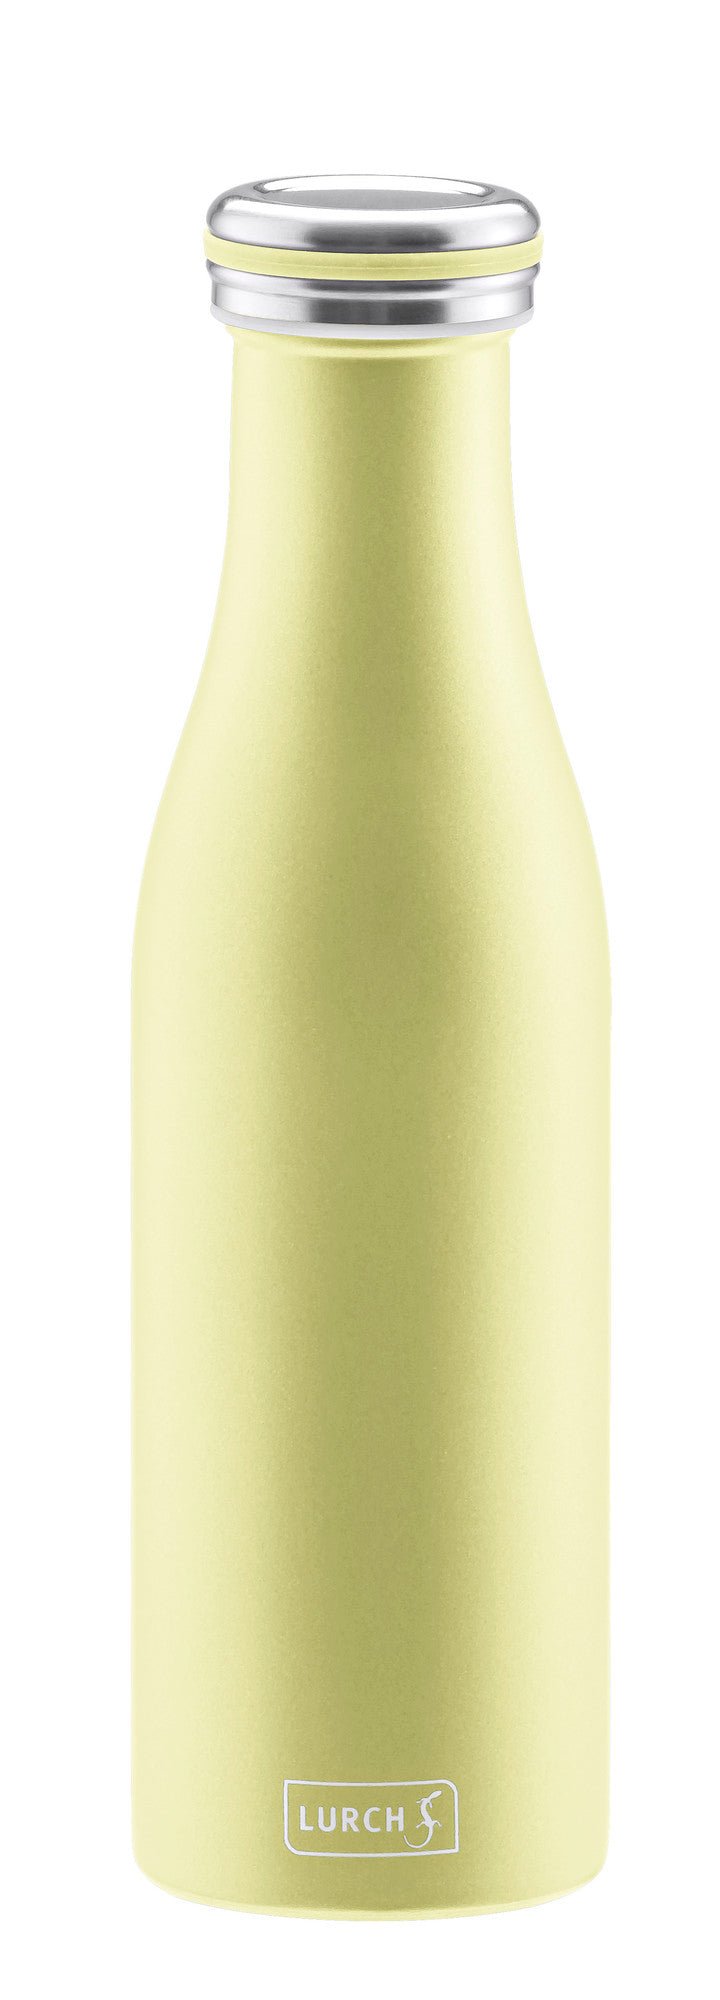 LURCH Isolier-Flasche Edelstahl 0,5l pearl yellow-L00240942